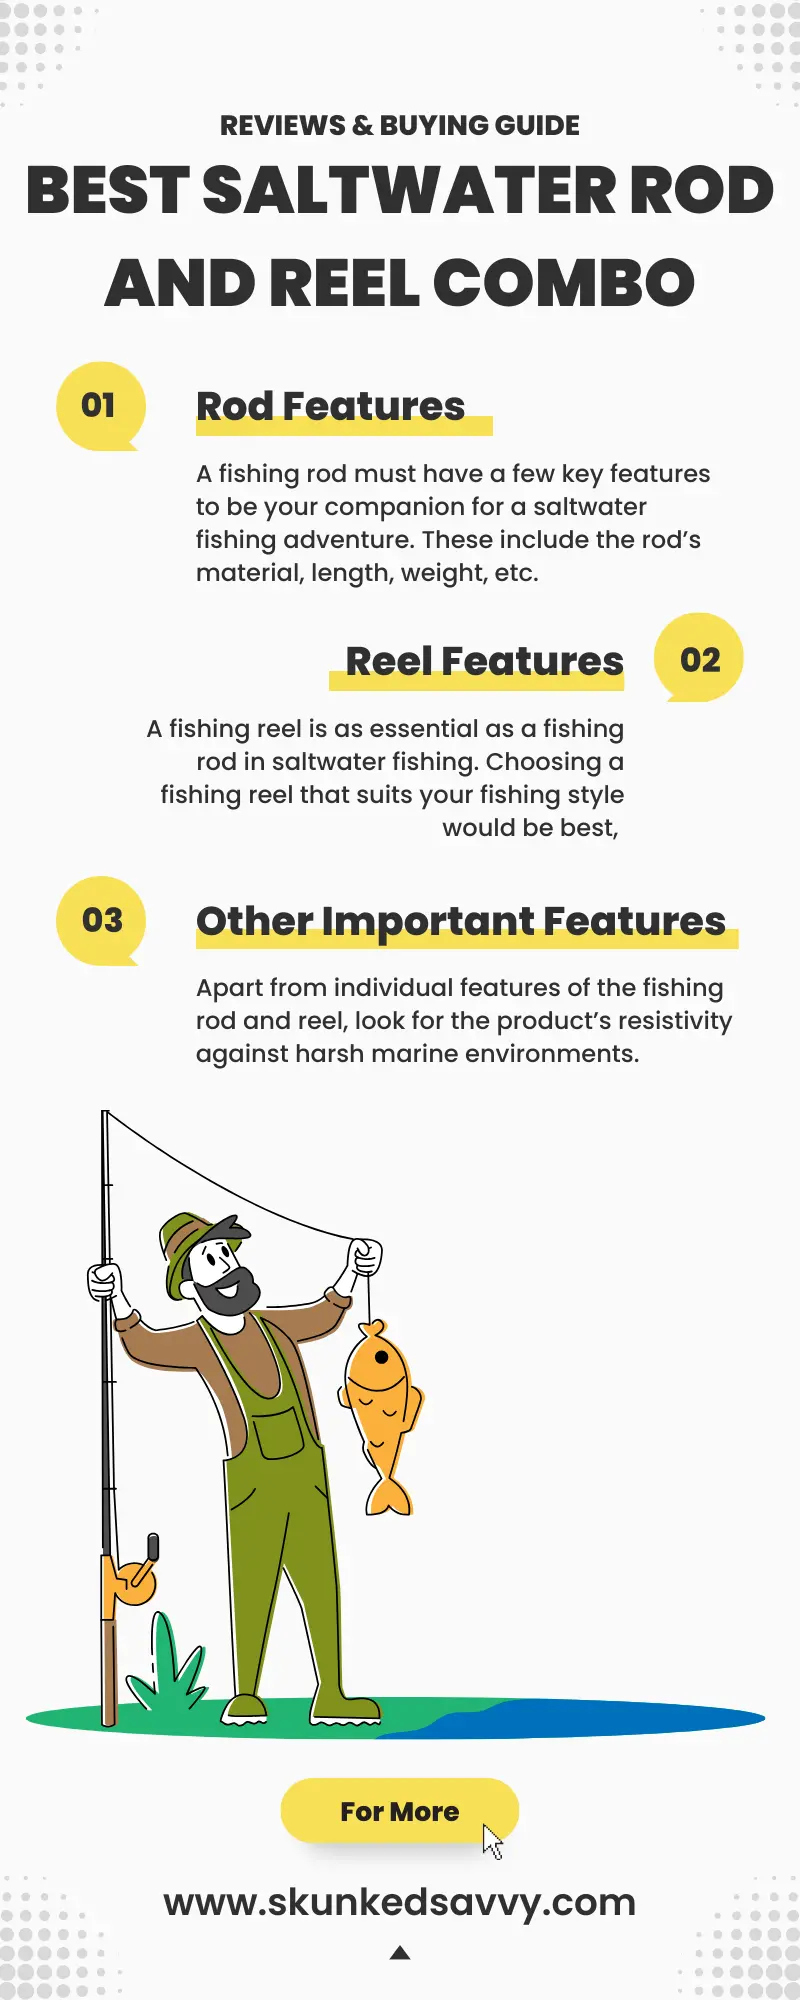 Buyer’s Guide of Best Saltwater Rod And Reel Combo